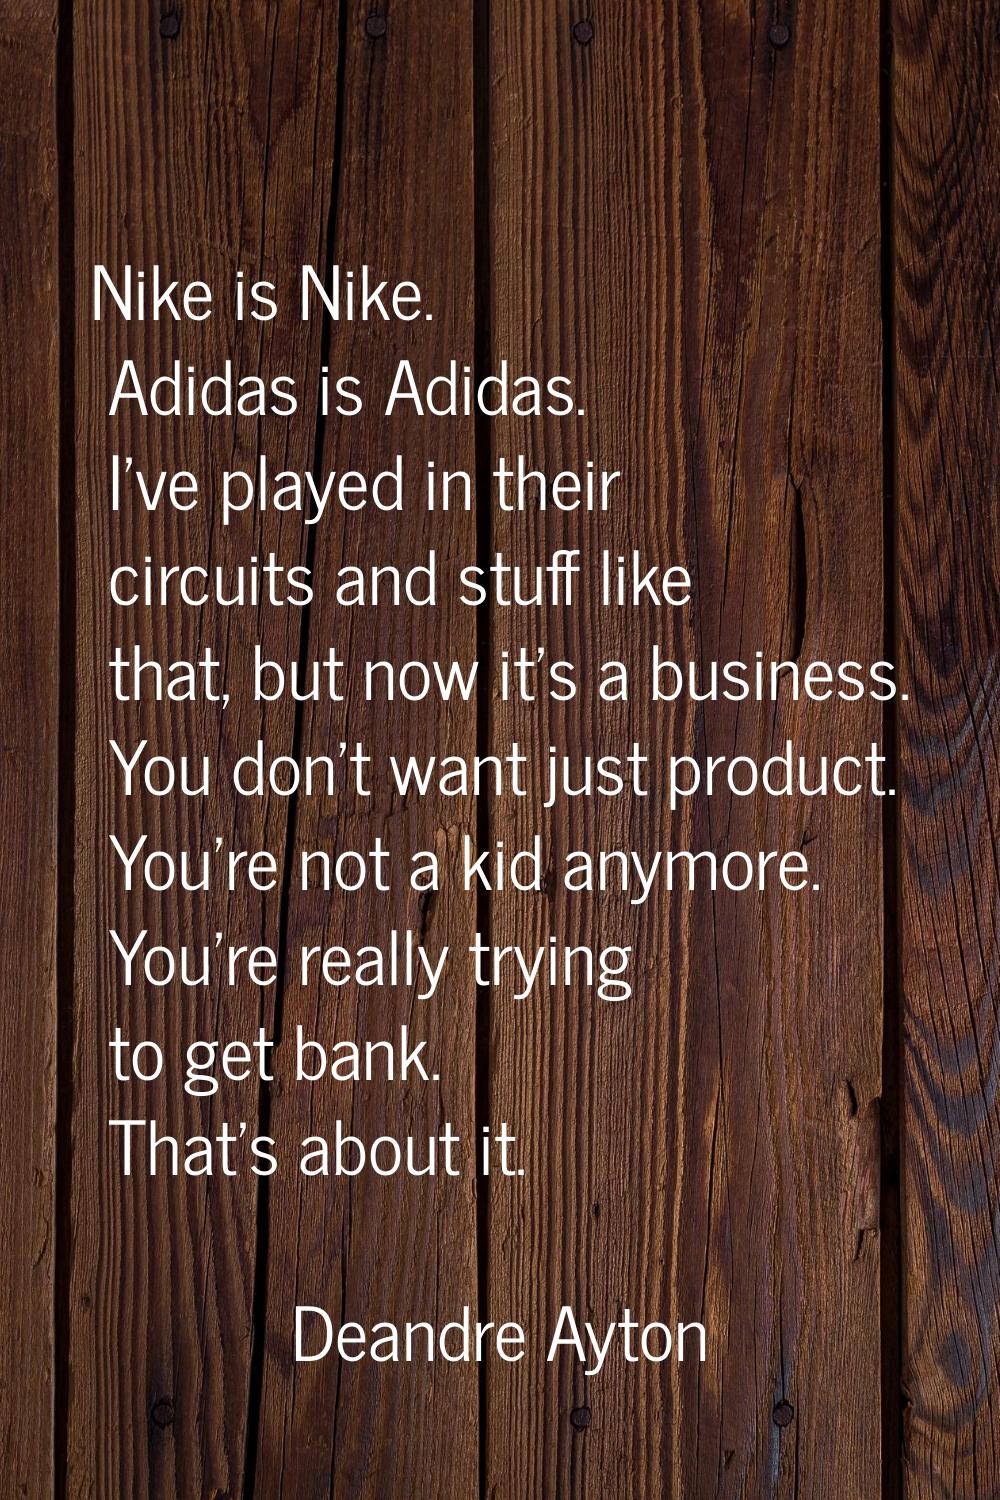 Nike is Nike. Adidas is Adidas. I've played in their circuits and stuff like that, but now it's a b